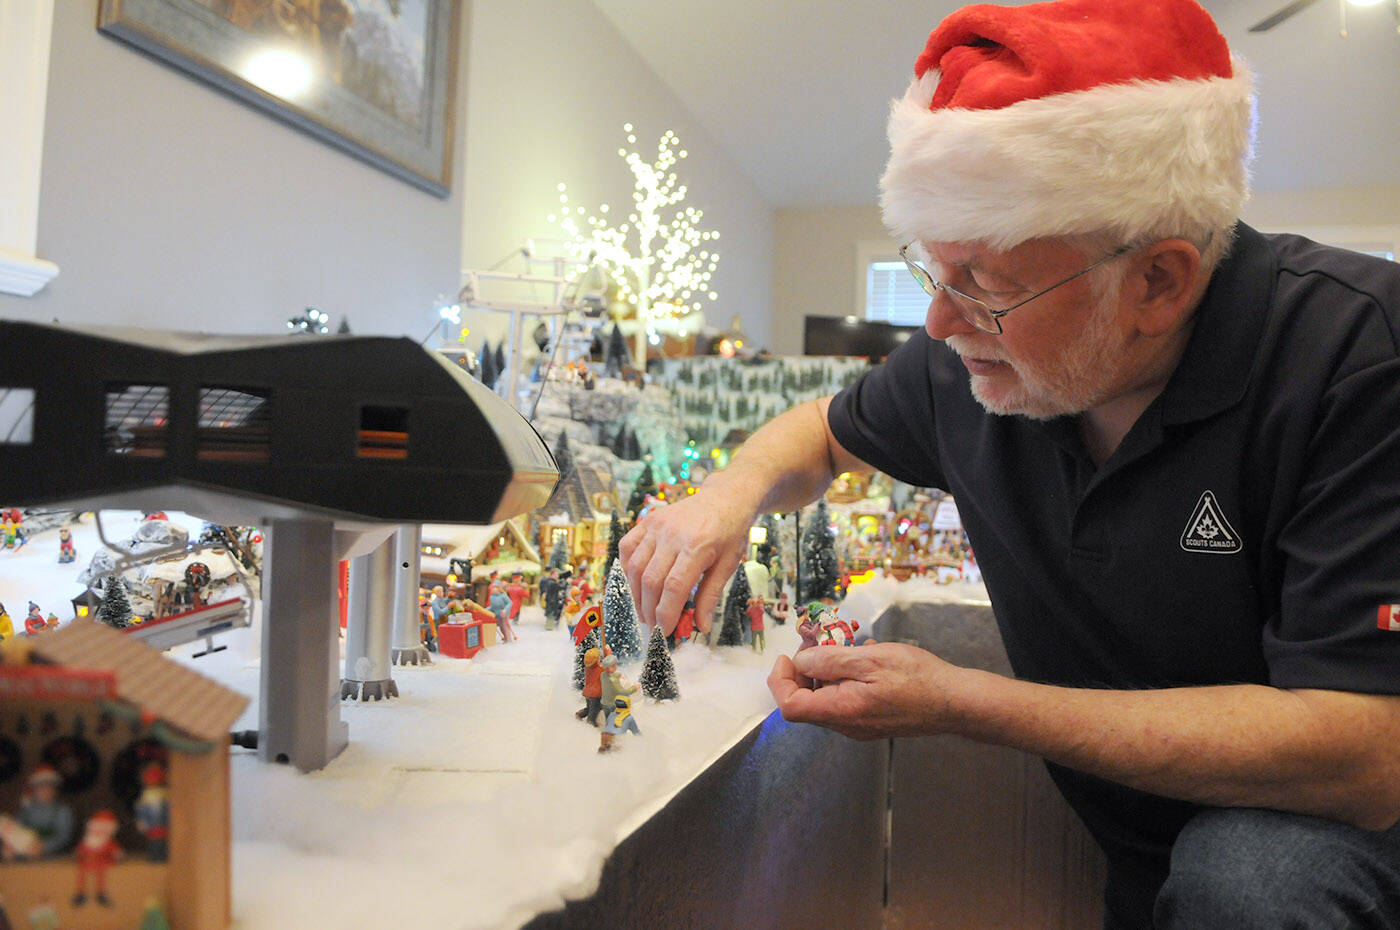 Terry Campbells display of Christmas miniatures takes up the entire living room of his Chilliwack home. He started the display in 2007 but it has been more challenging for him lately as hes been legally blind since 2018. (Jenna Hauck/ Chilliwack Progress)